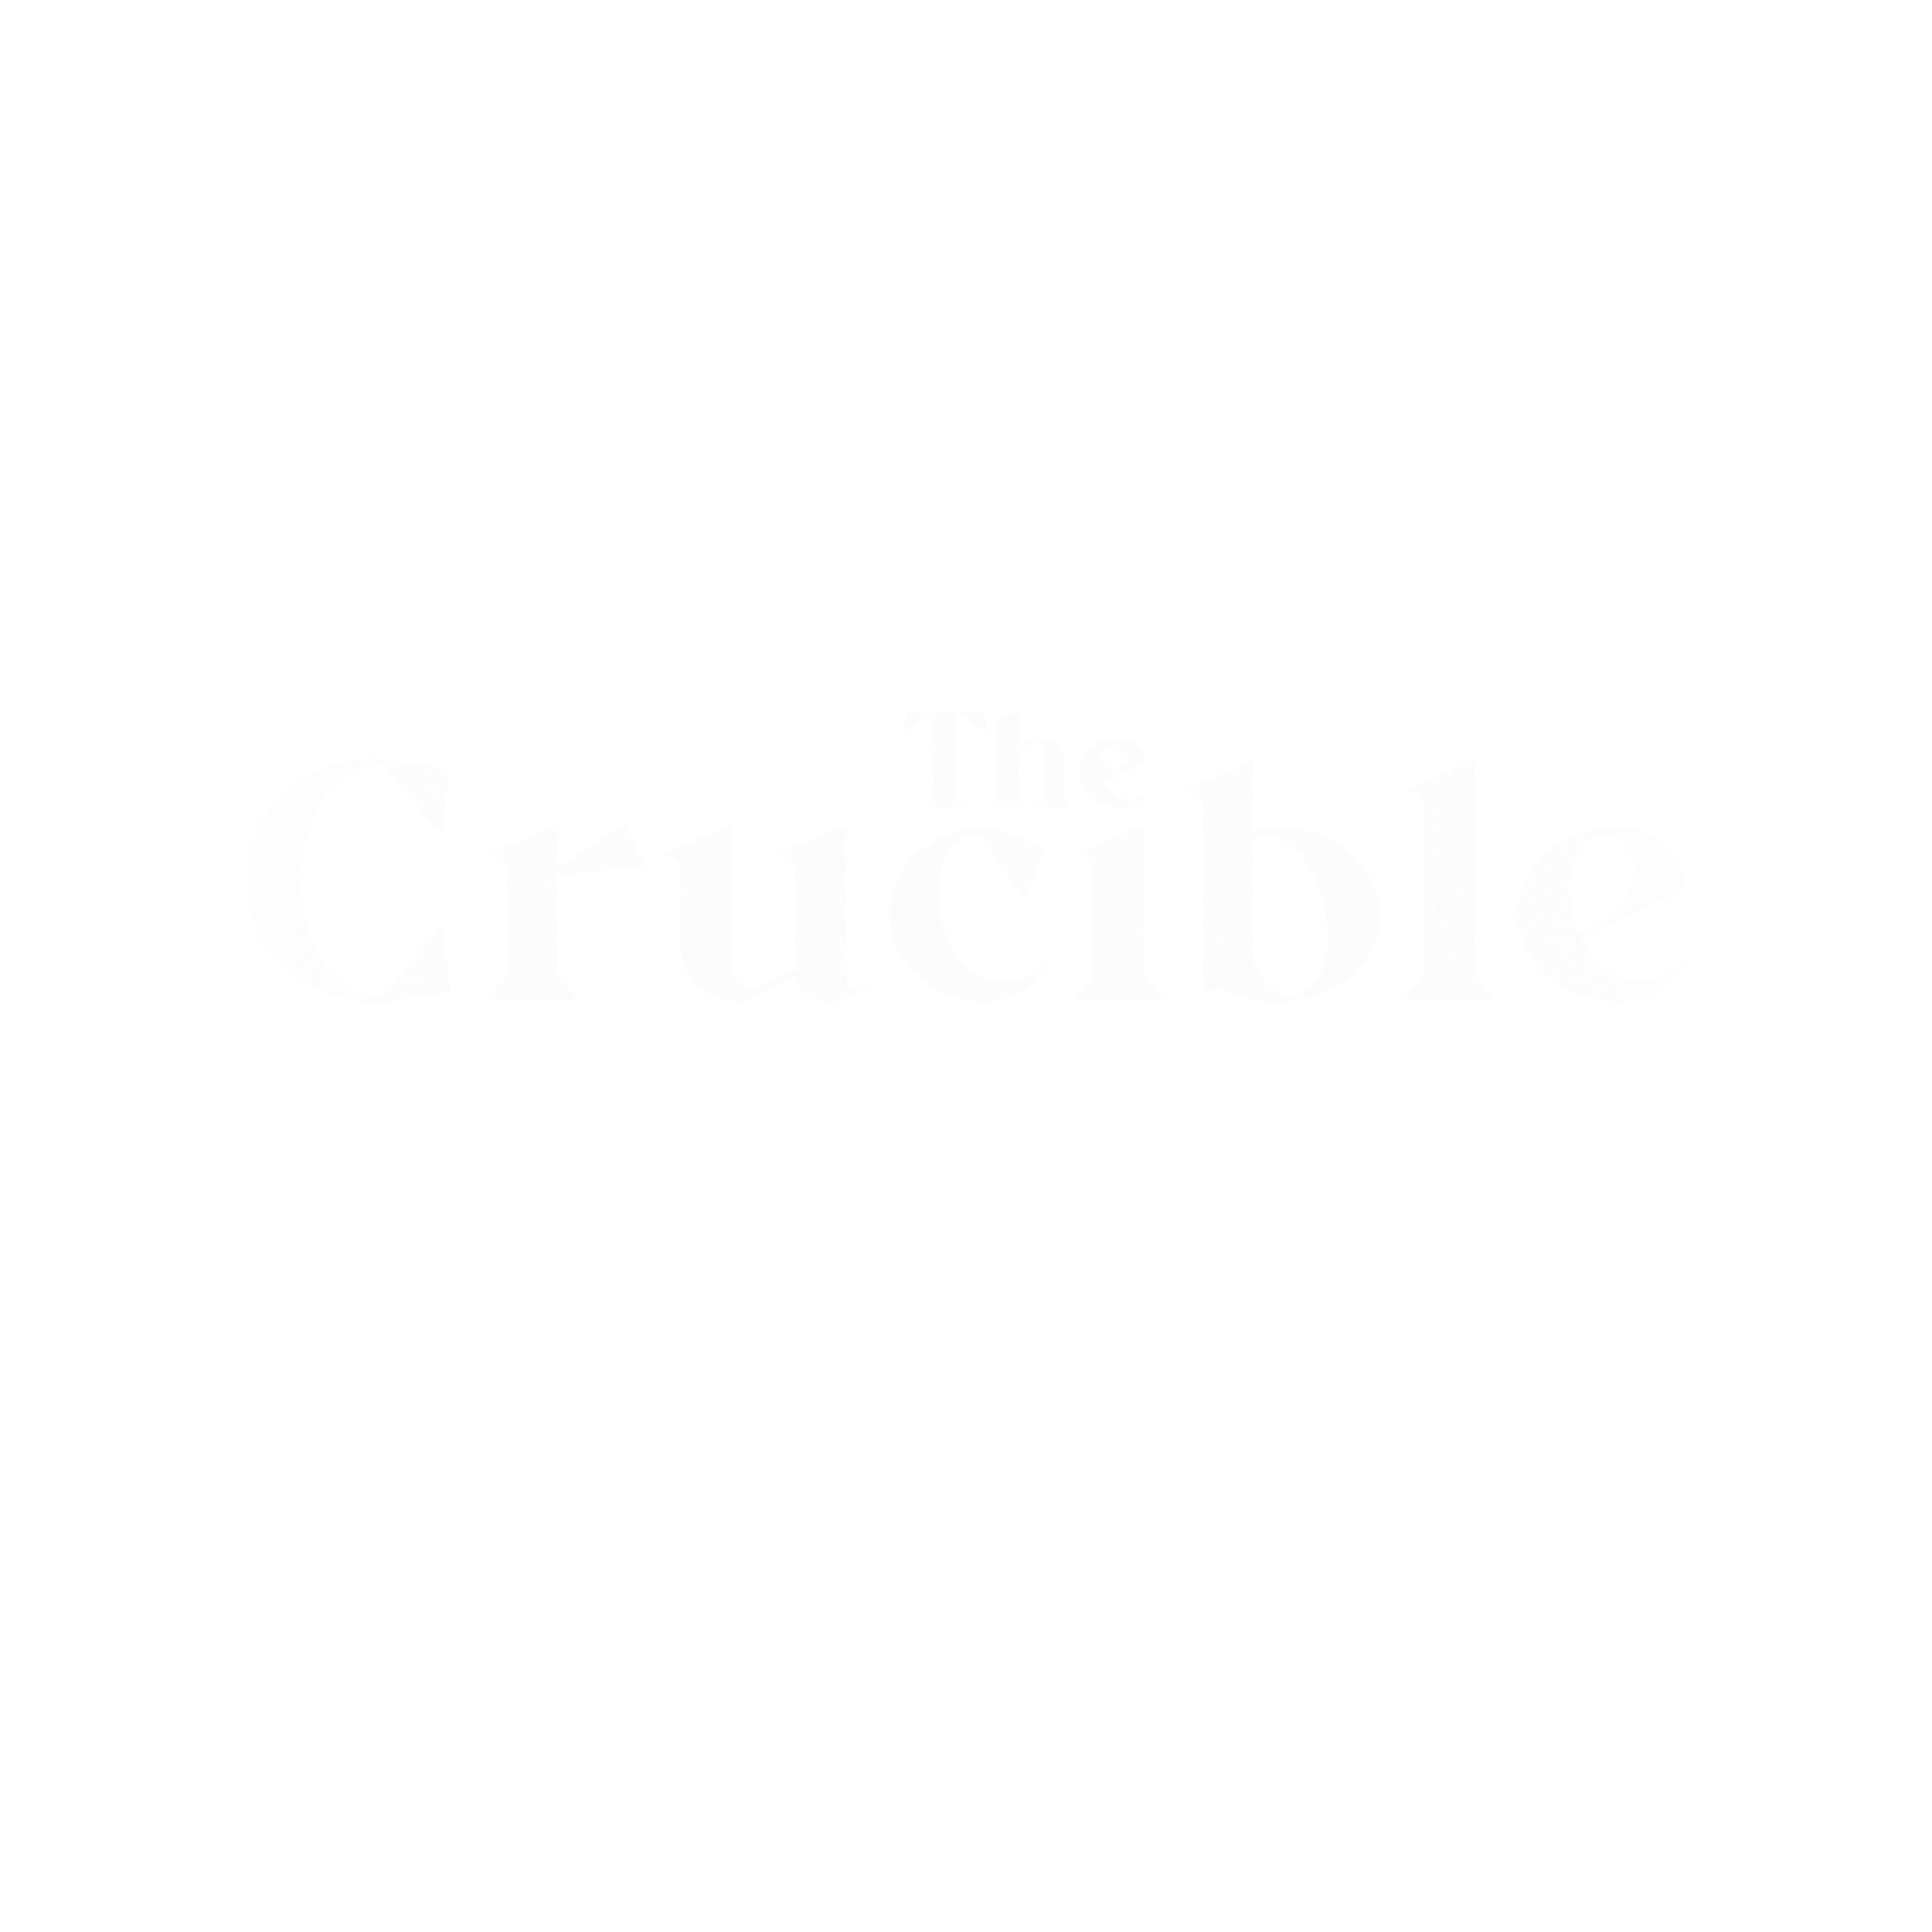 The Crucible (US affiliates) Coupon Codes